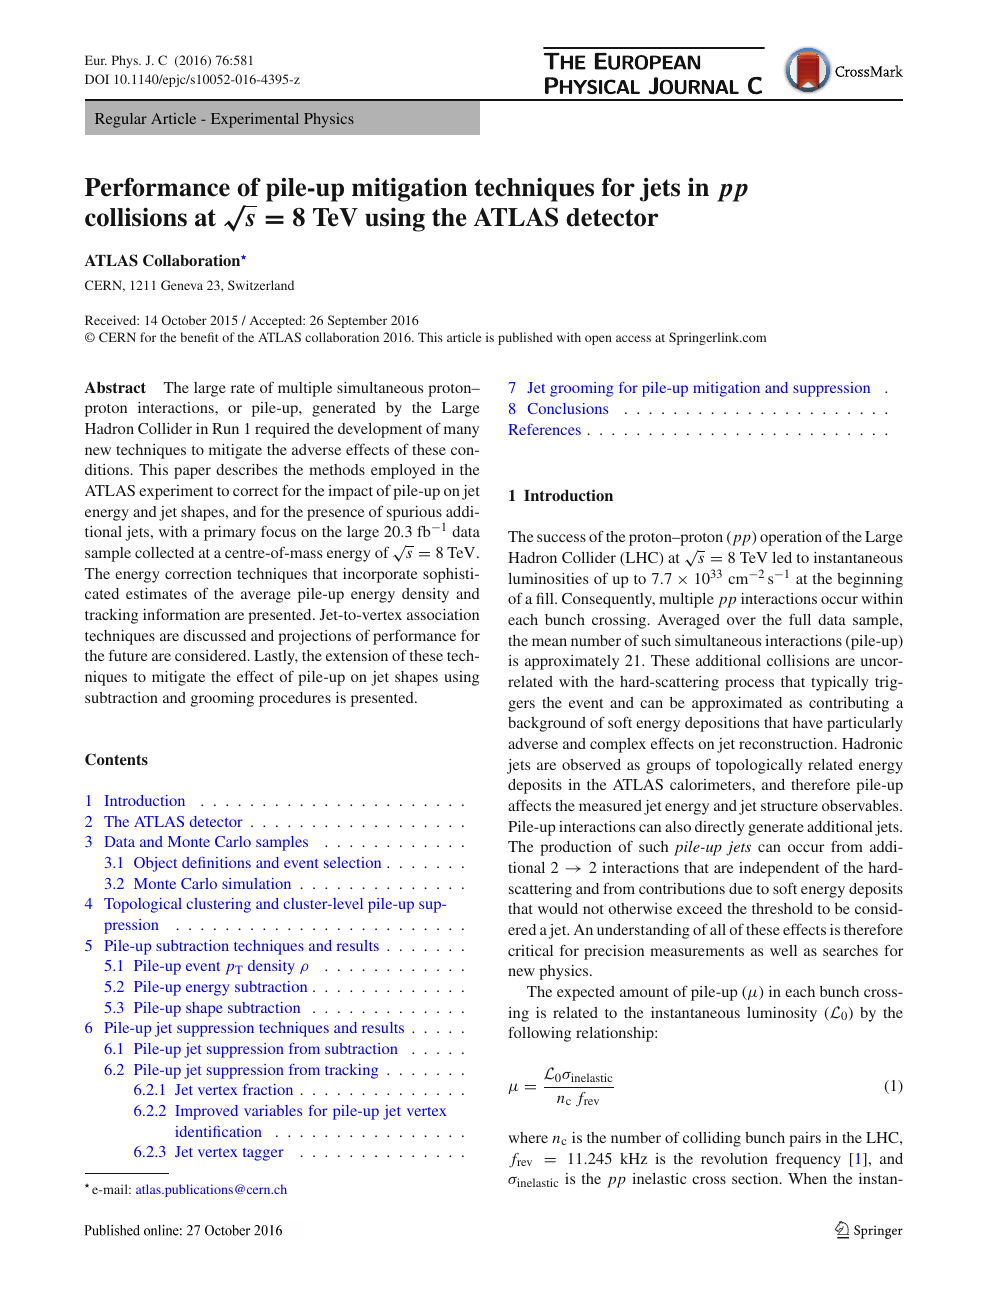 Performance Of Pile Up Mitigation Techniques For Jets In Pp P P Collisions At Sqrt S 8 S 8 Tev Using The Atlas Detector Topic Of Research Paper In Physical Sciences Download Scholarly